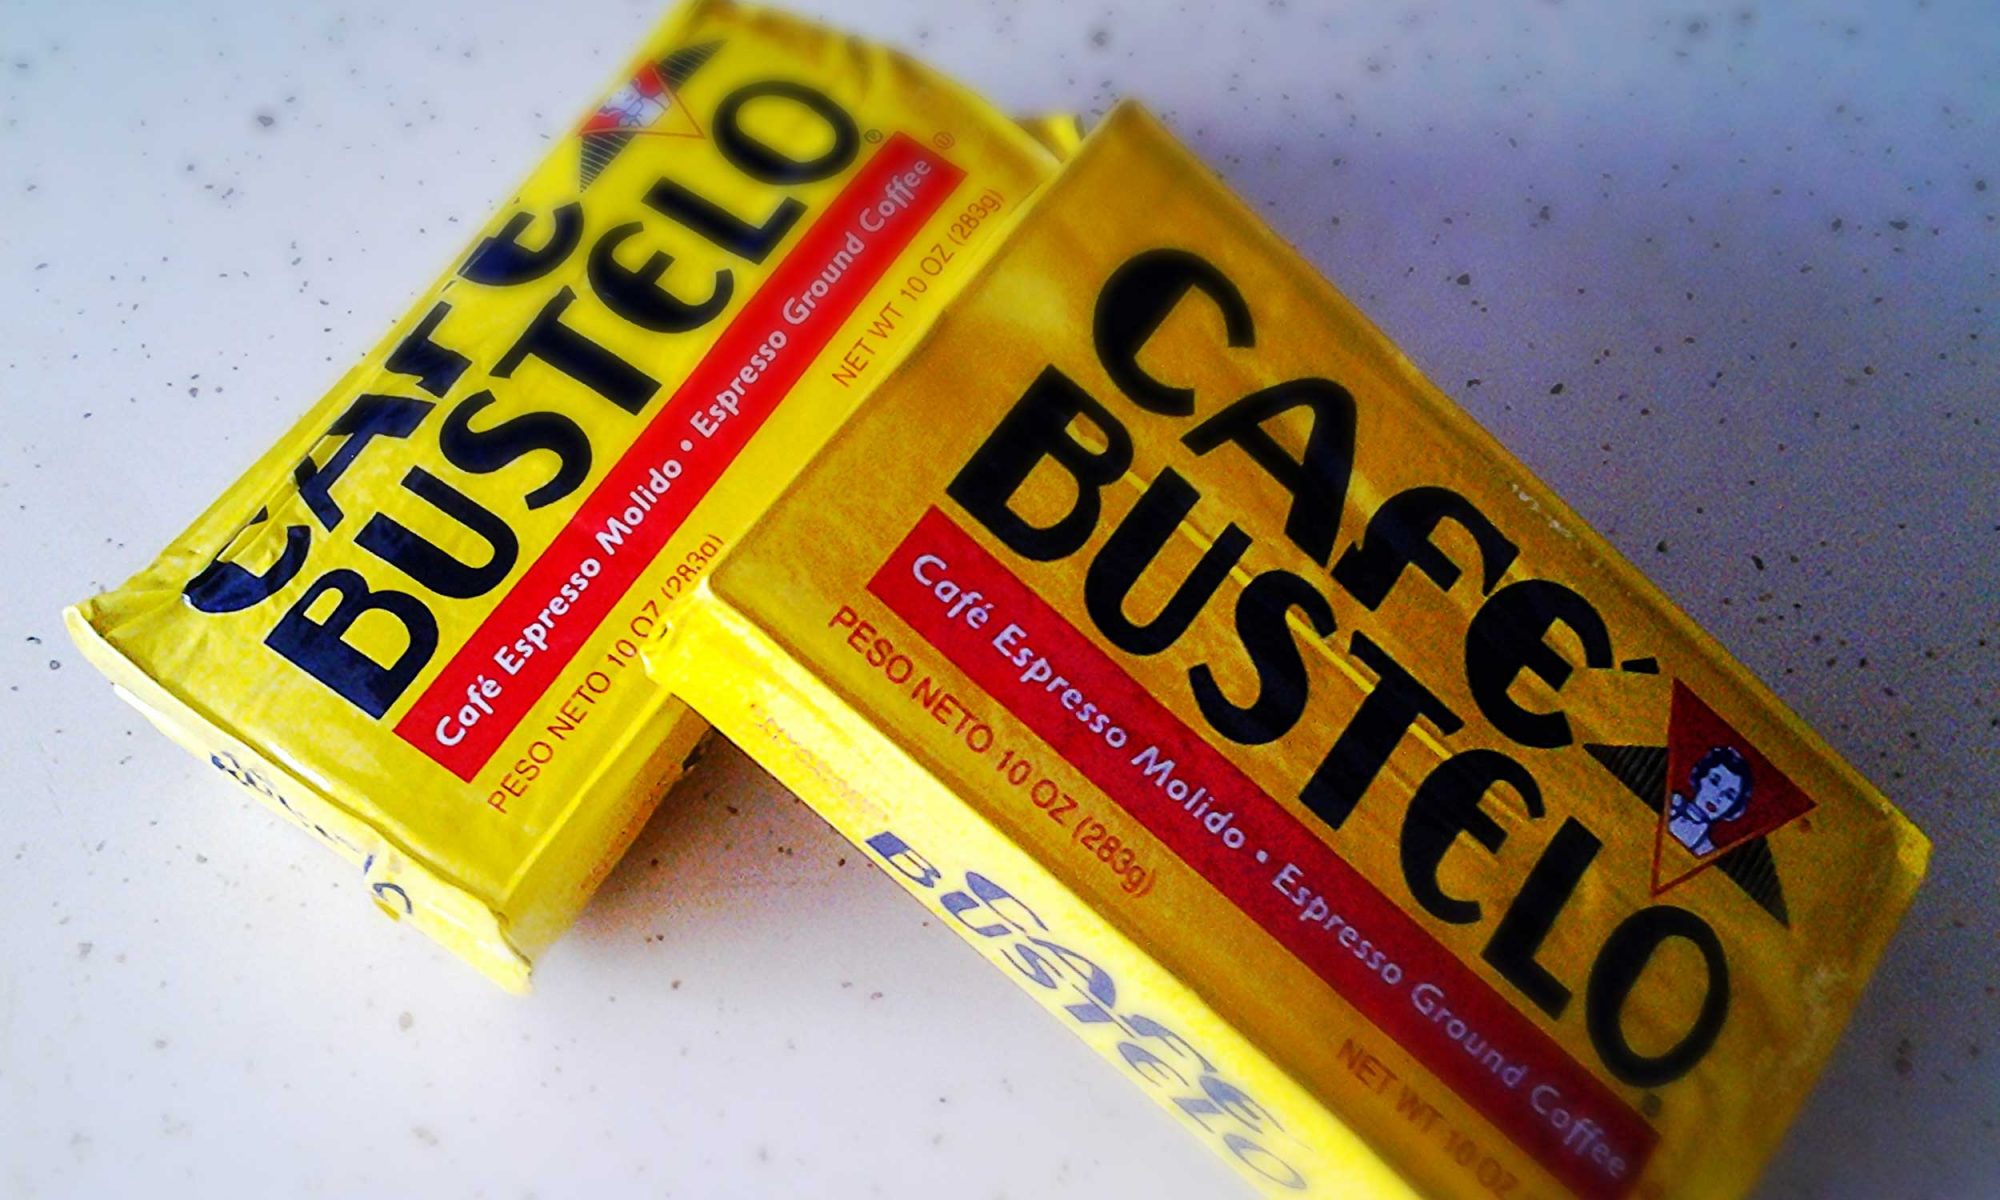 EC: Get Free Coffee from Cafe Bustelo at Their NYC Pop-Up Cafe